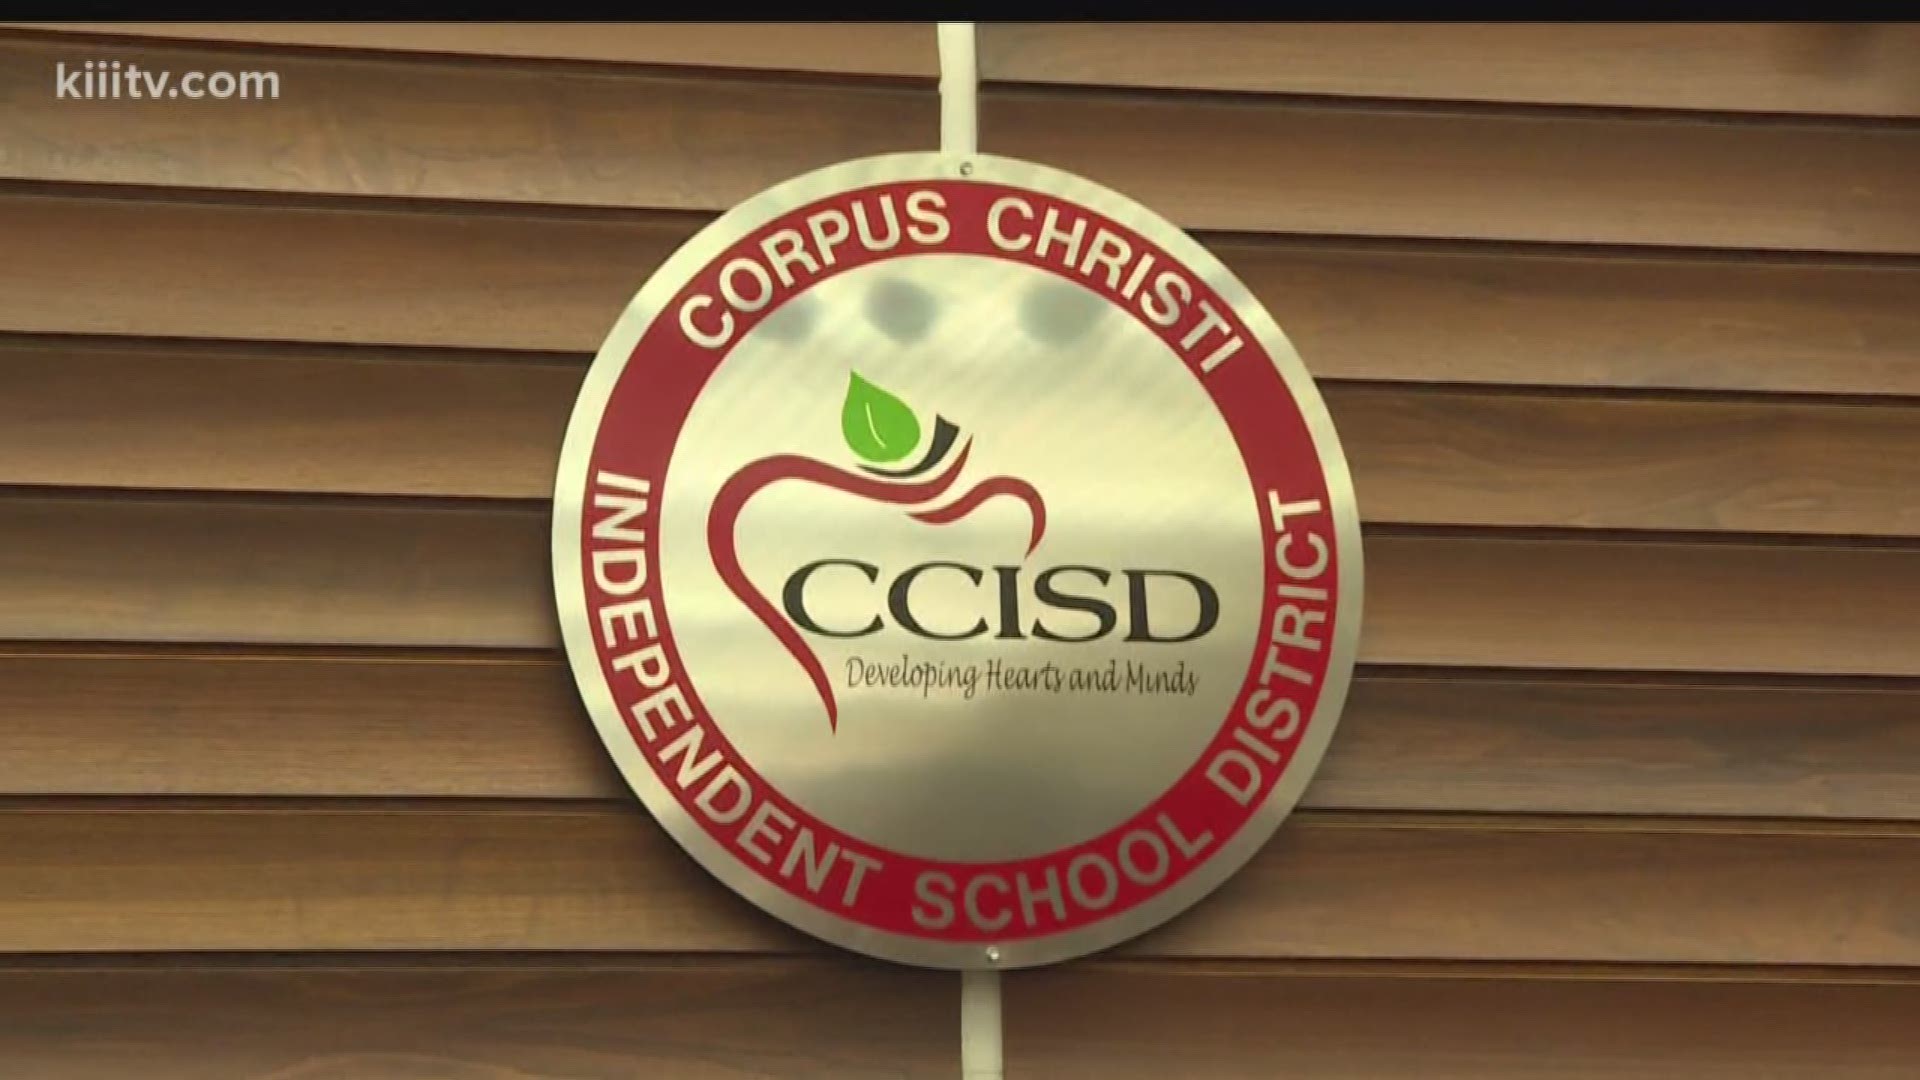 Corpus Christi Independent School District has raised the pay rate for substitute teachers after a difficult semester for finding people to fill positions.